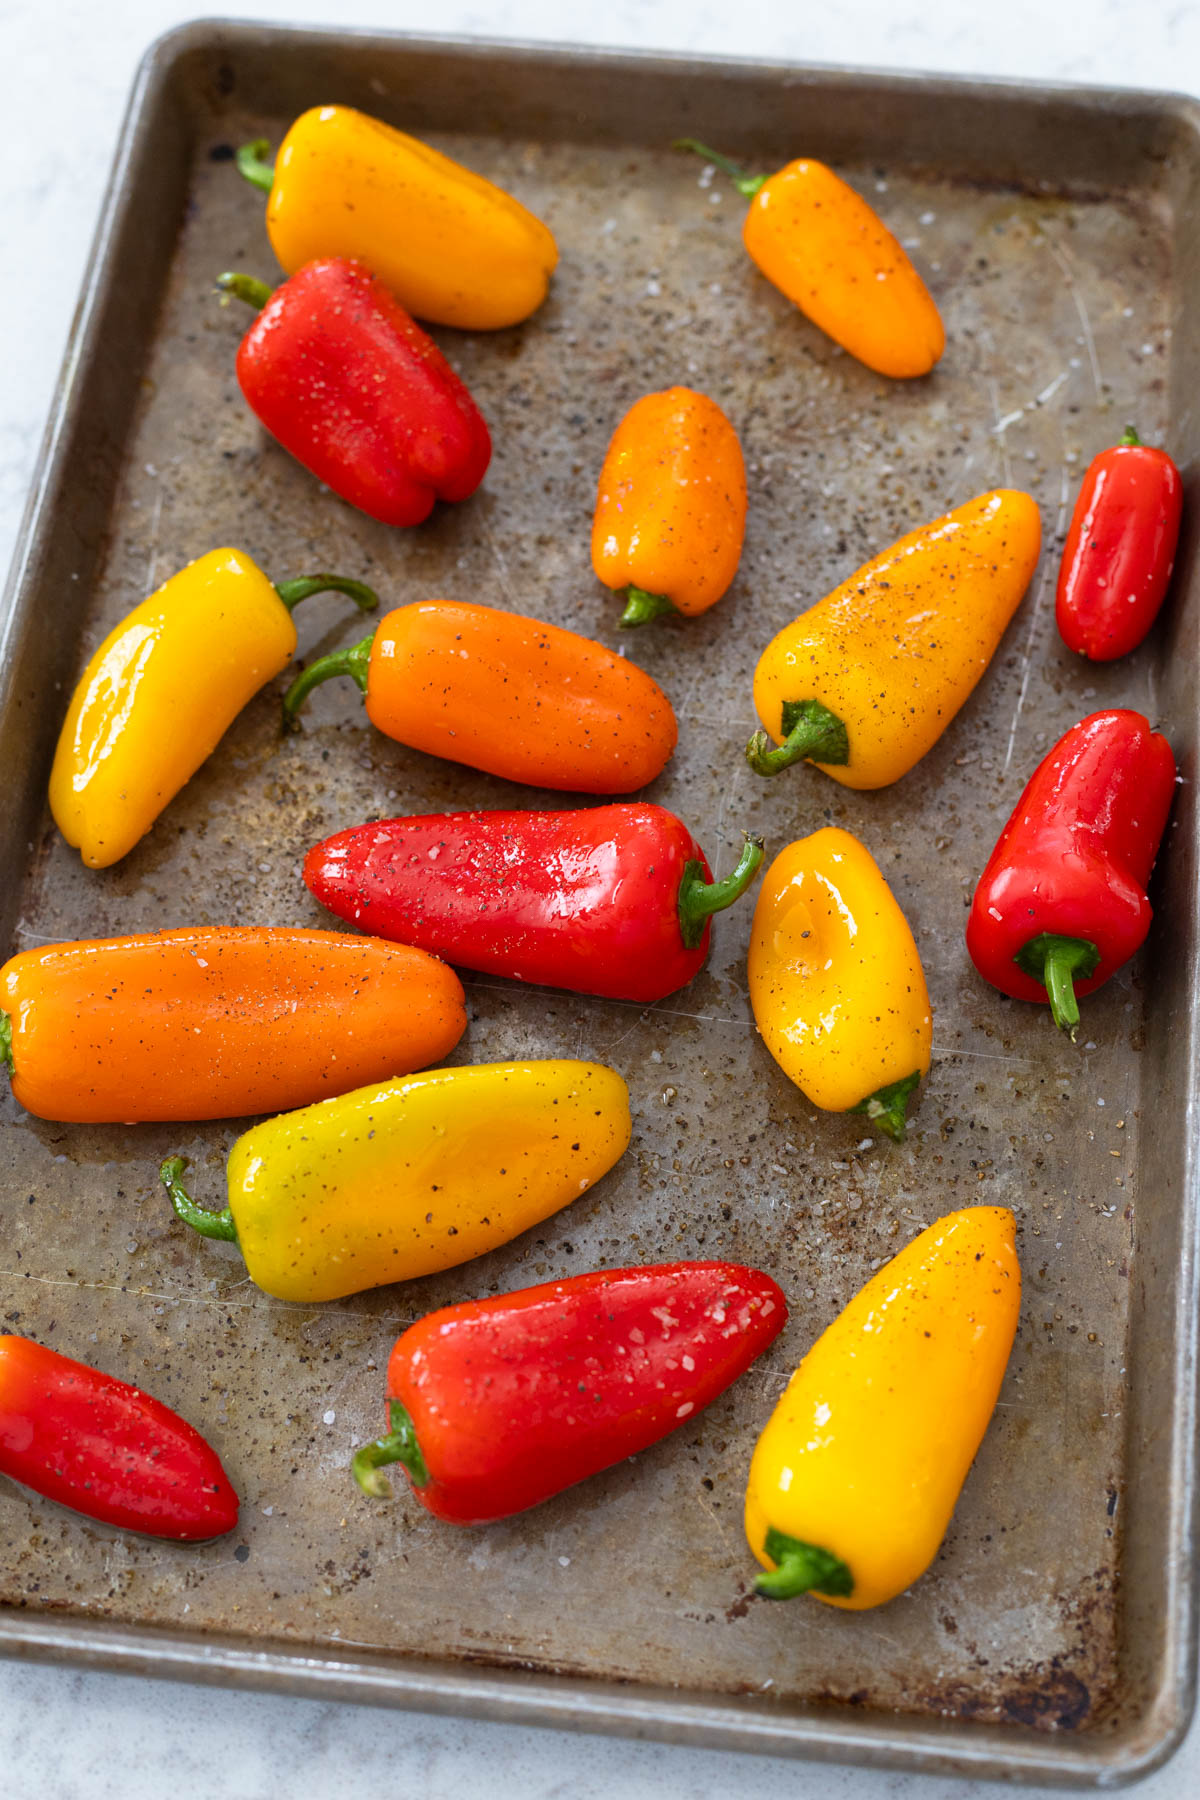 The mini peppers have been tossed in olive oil and sprinkled with salt and pepper.